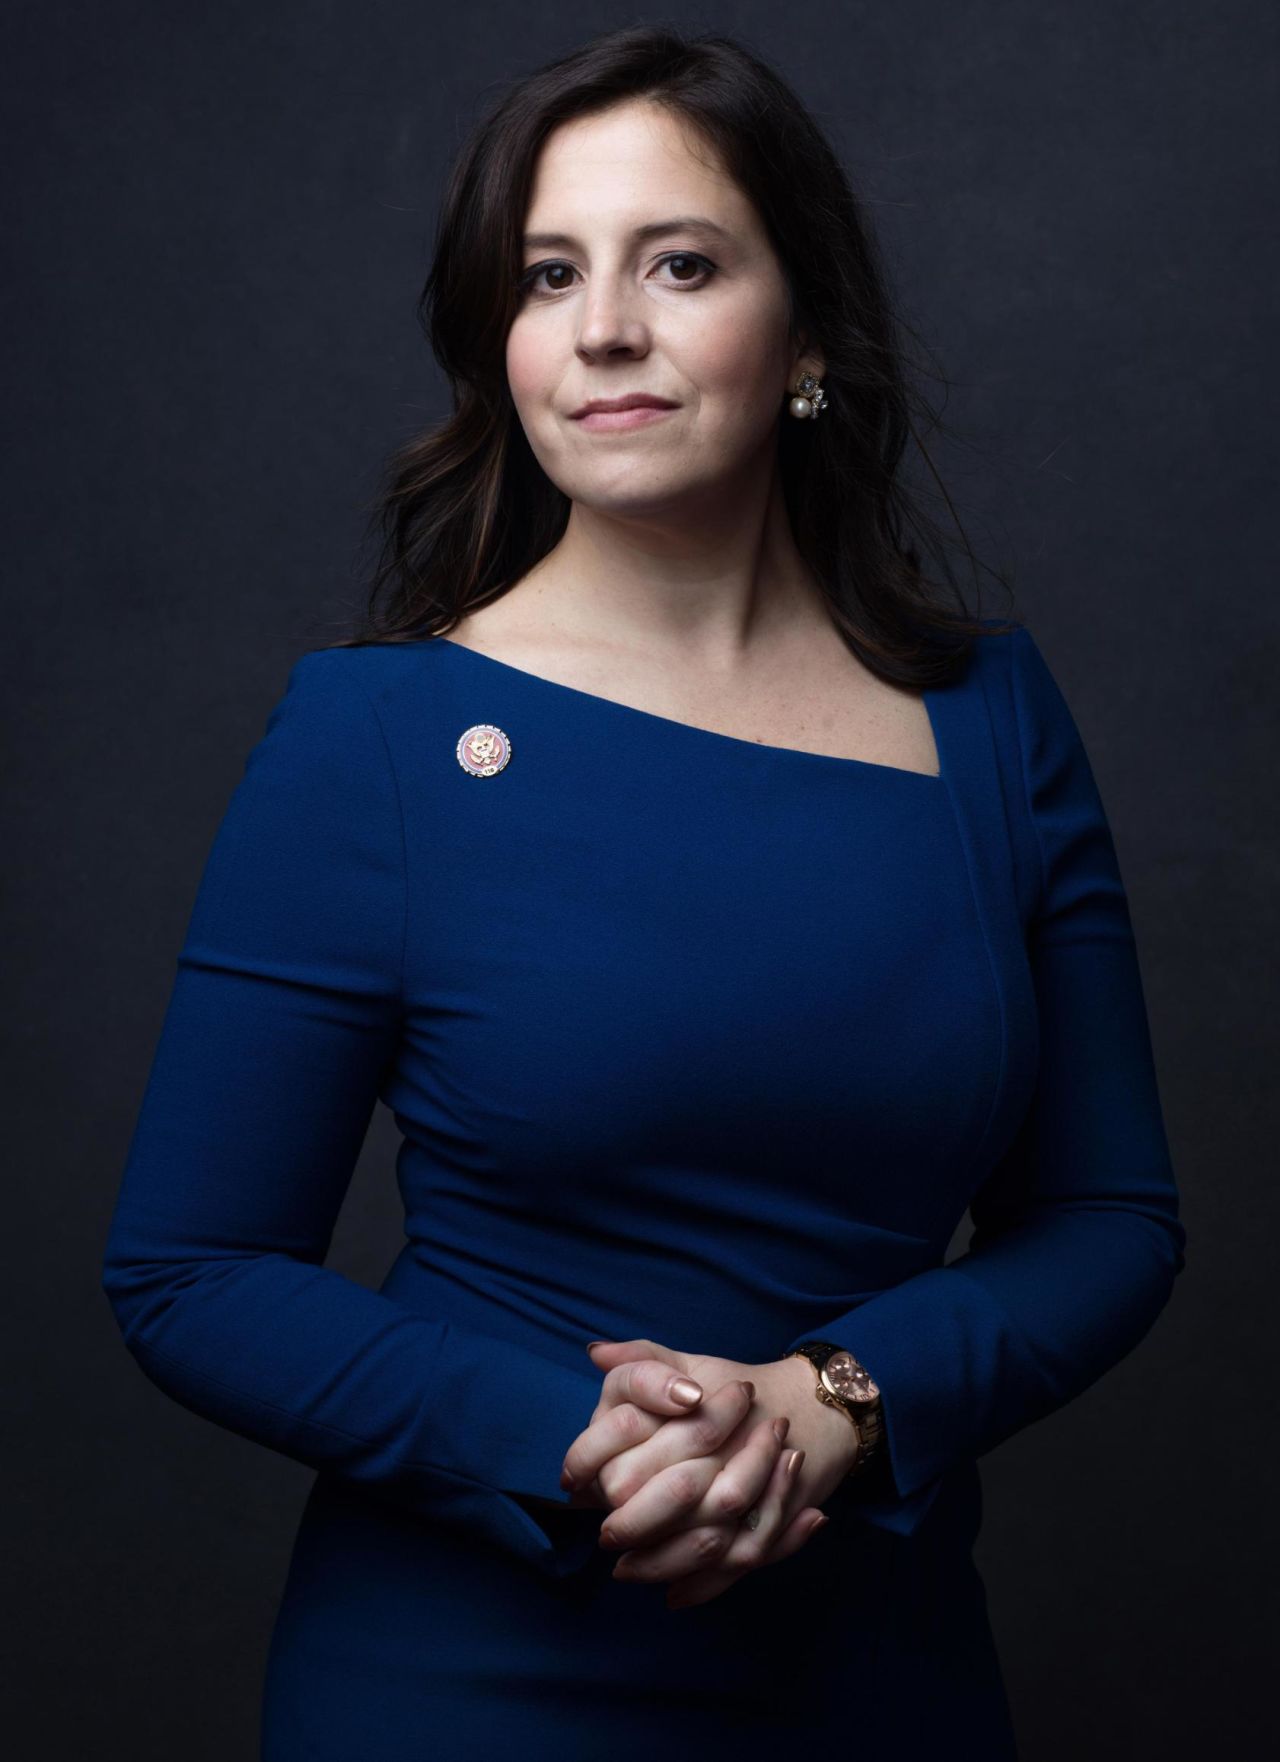 US Rep. Elise Stefanik poses for a portrait in Washington, DC, in January 2019. The New York Republican has replaced US Rep. Liz Cheney as the third-ranking Republican in the House.